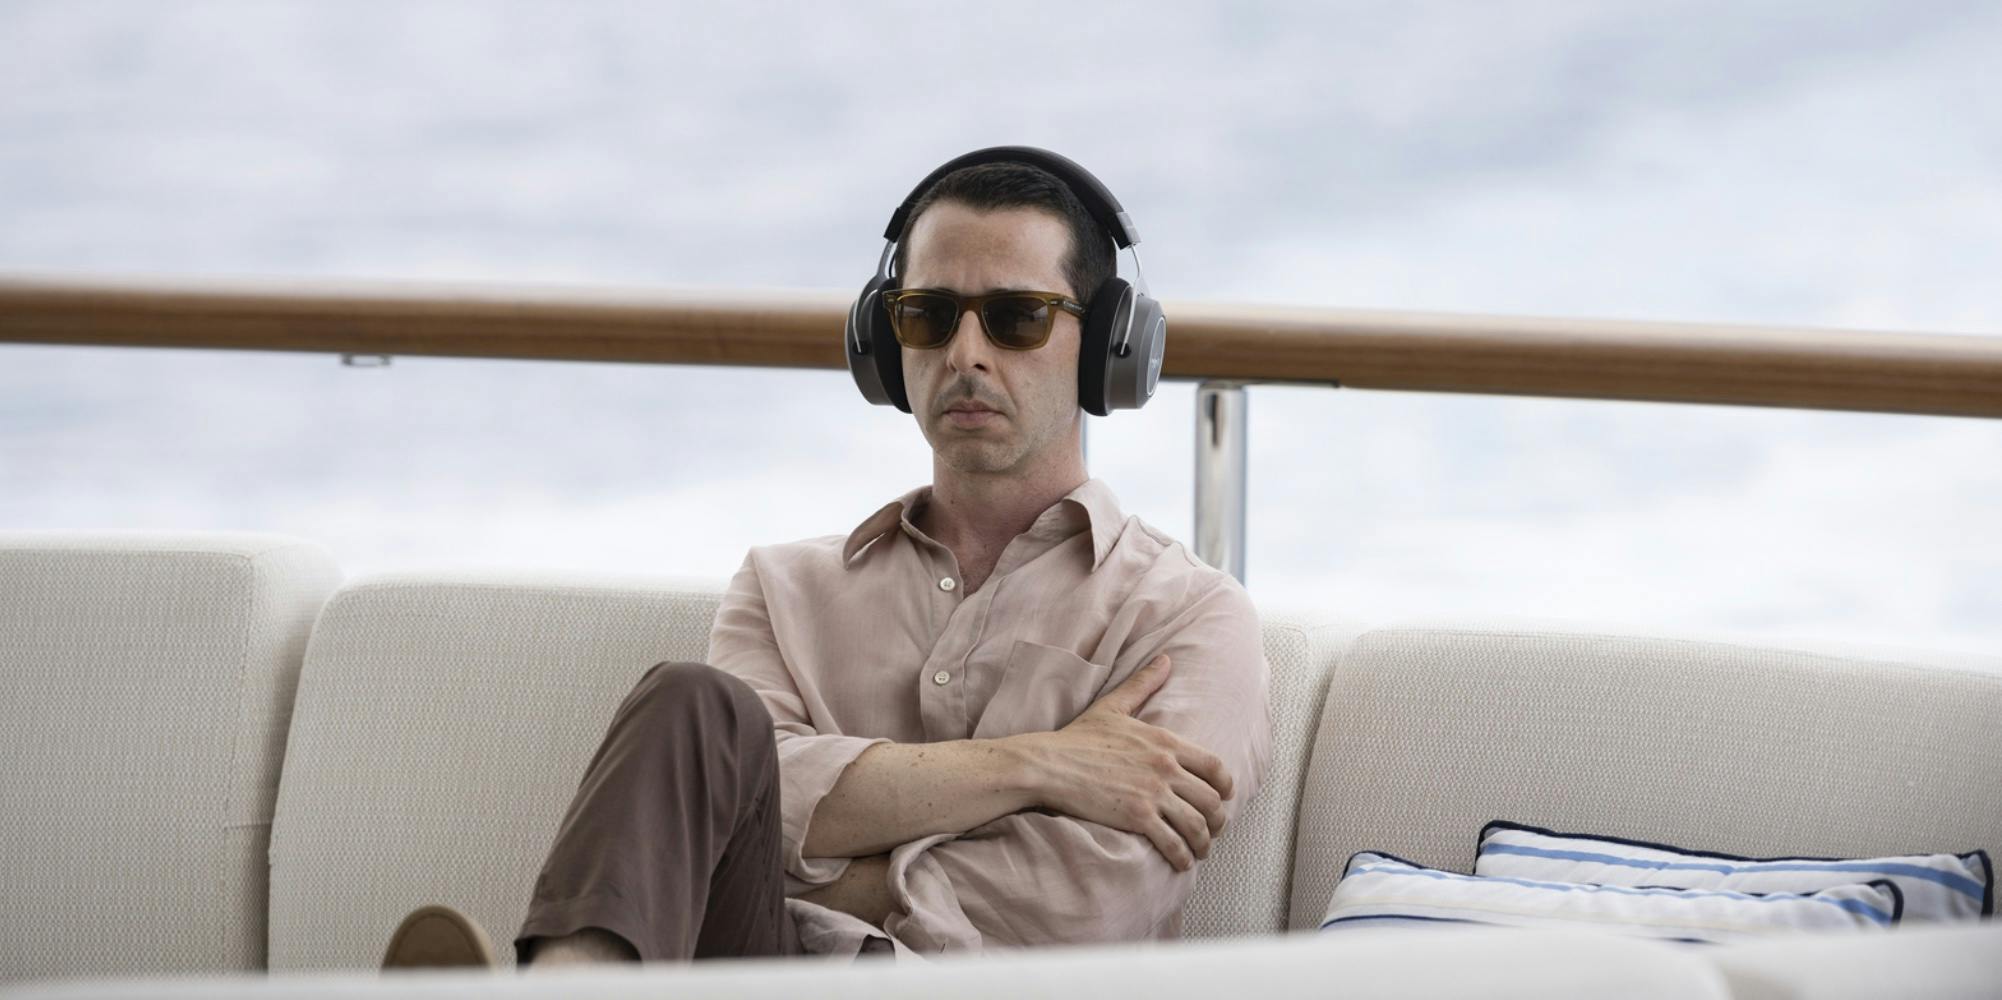 kendall roy (jeremy strong) sitting on a boat wearing headphones